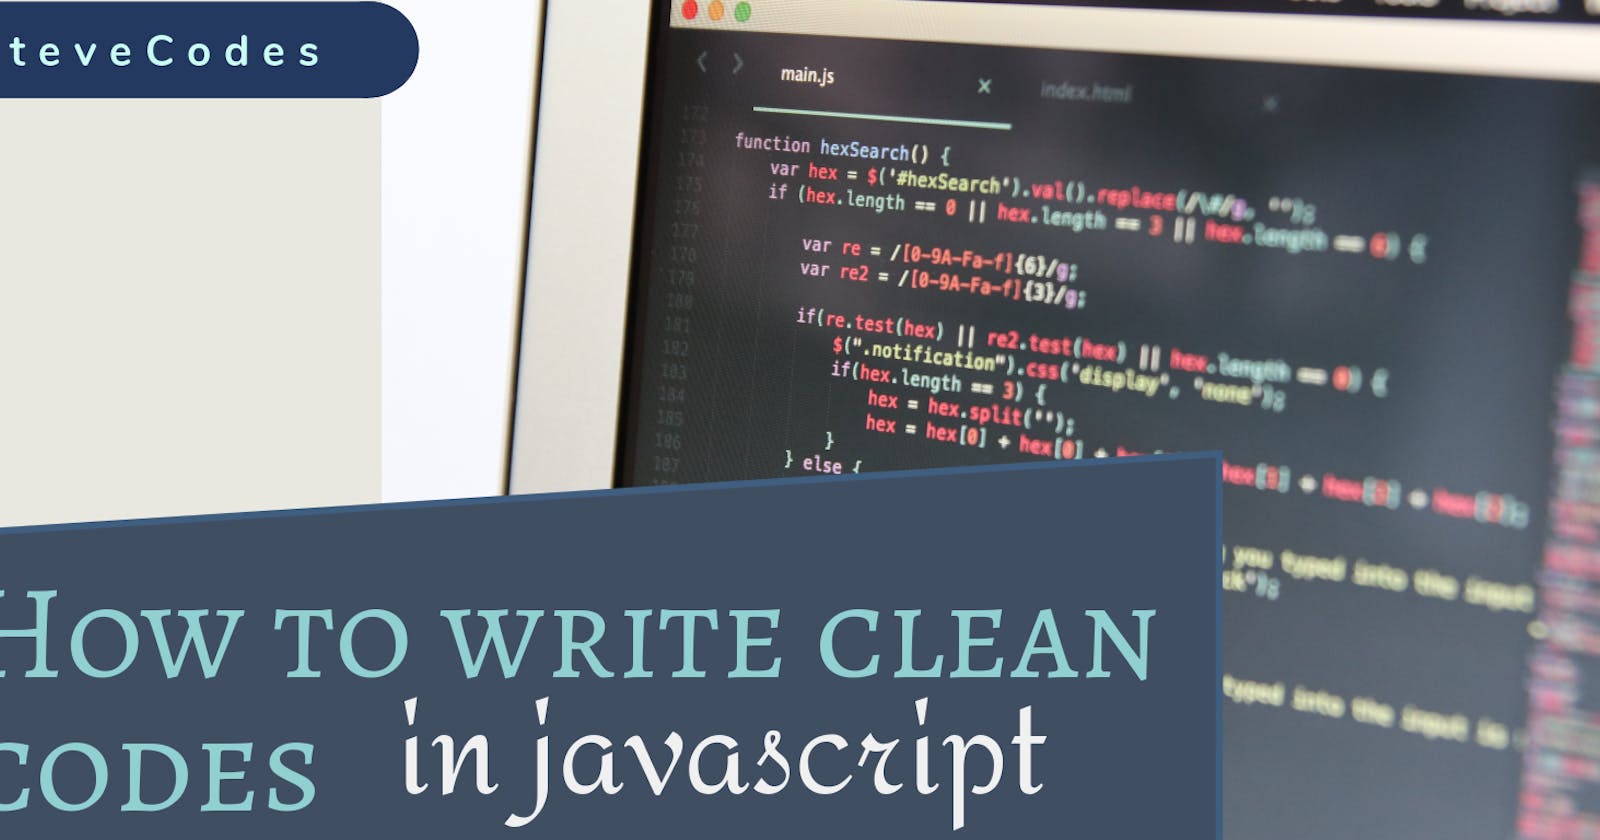 What is clean code? Do you need comments to write clean codes?